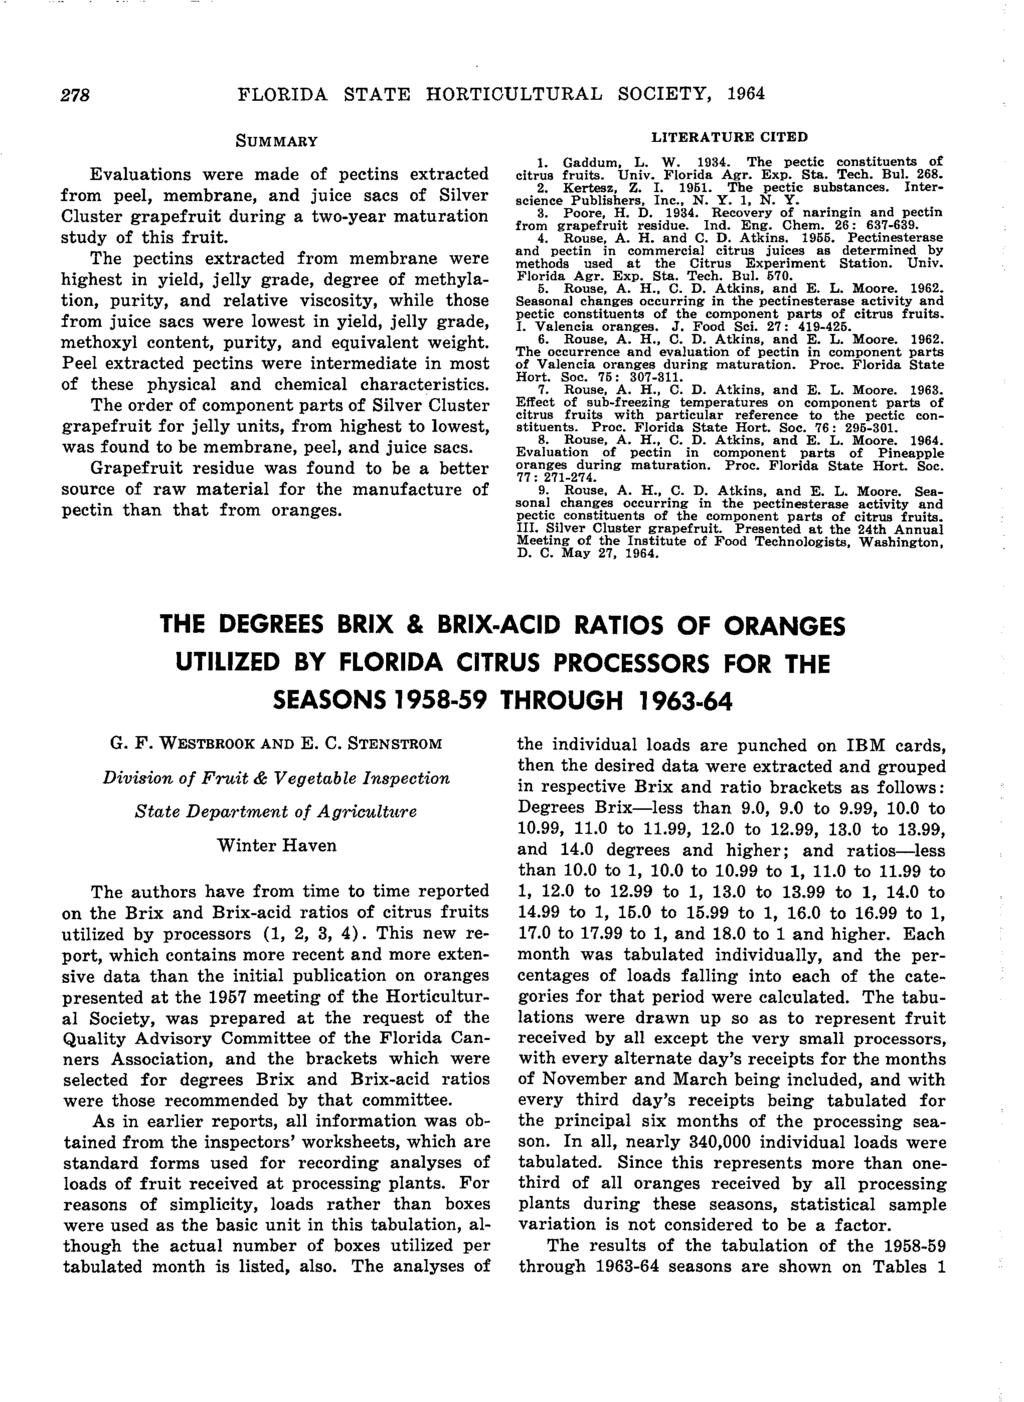 278 FLORIDA STATE HORTICULTURAL SOCIETY, 1964 Summary Evaluations were made of pectins extracted from peel, membrane, and juice sacs of Silver Cluster grapefruit during a two-year maturation study of